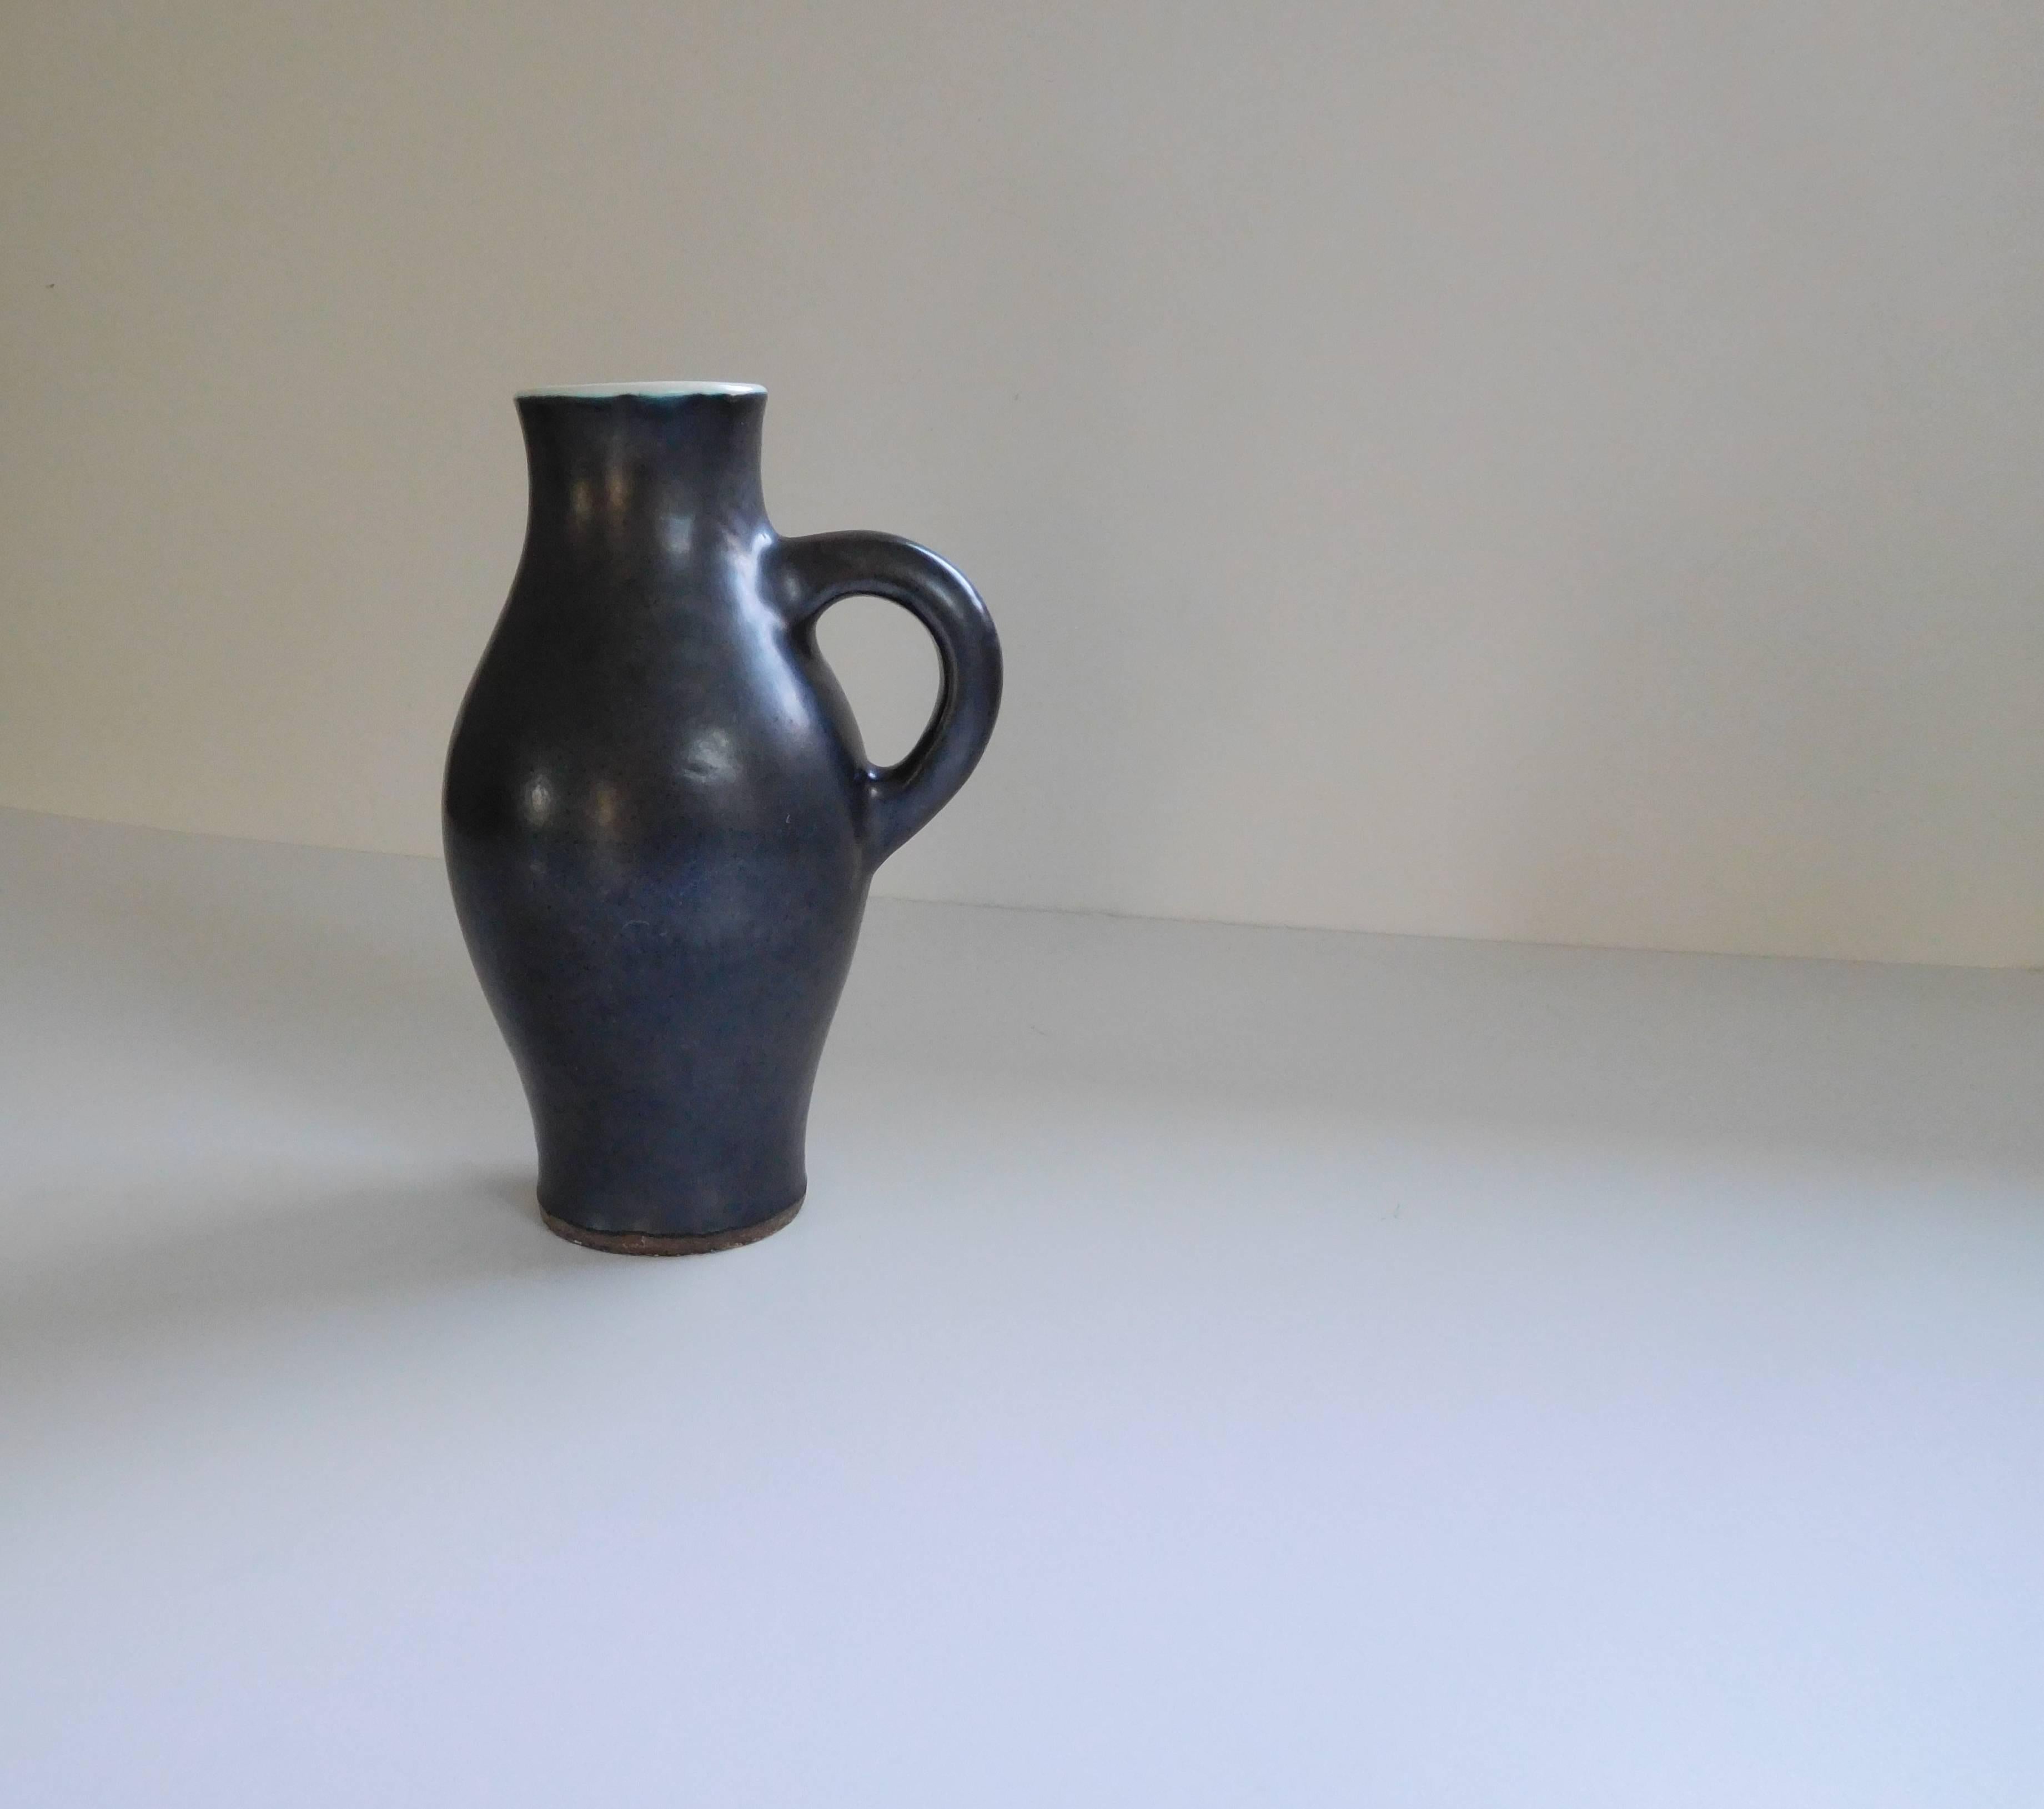 Clay Exceptional Georges Jouve Ceramic Pitcher, 1950s, France For Sale